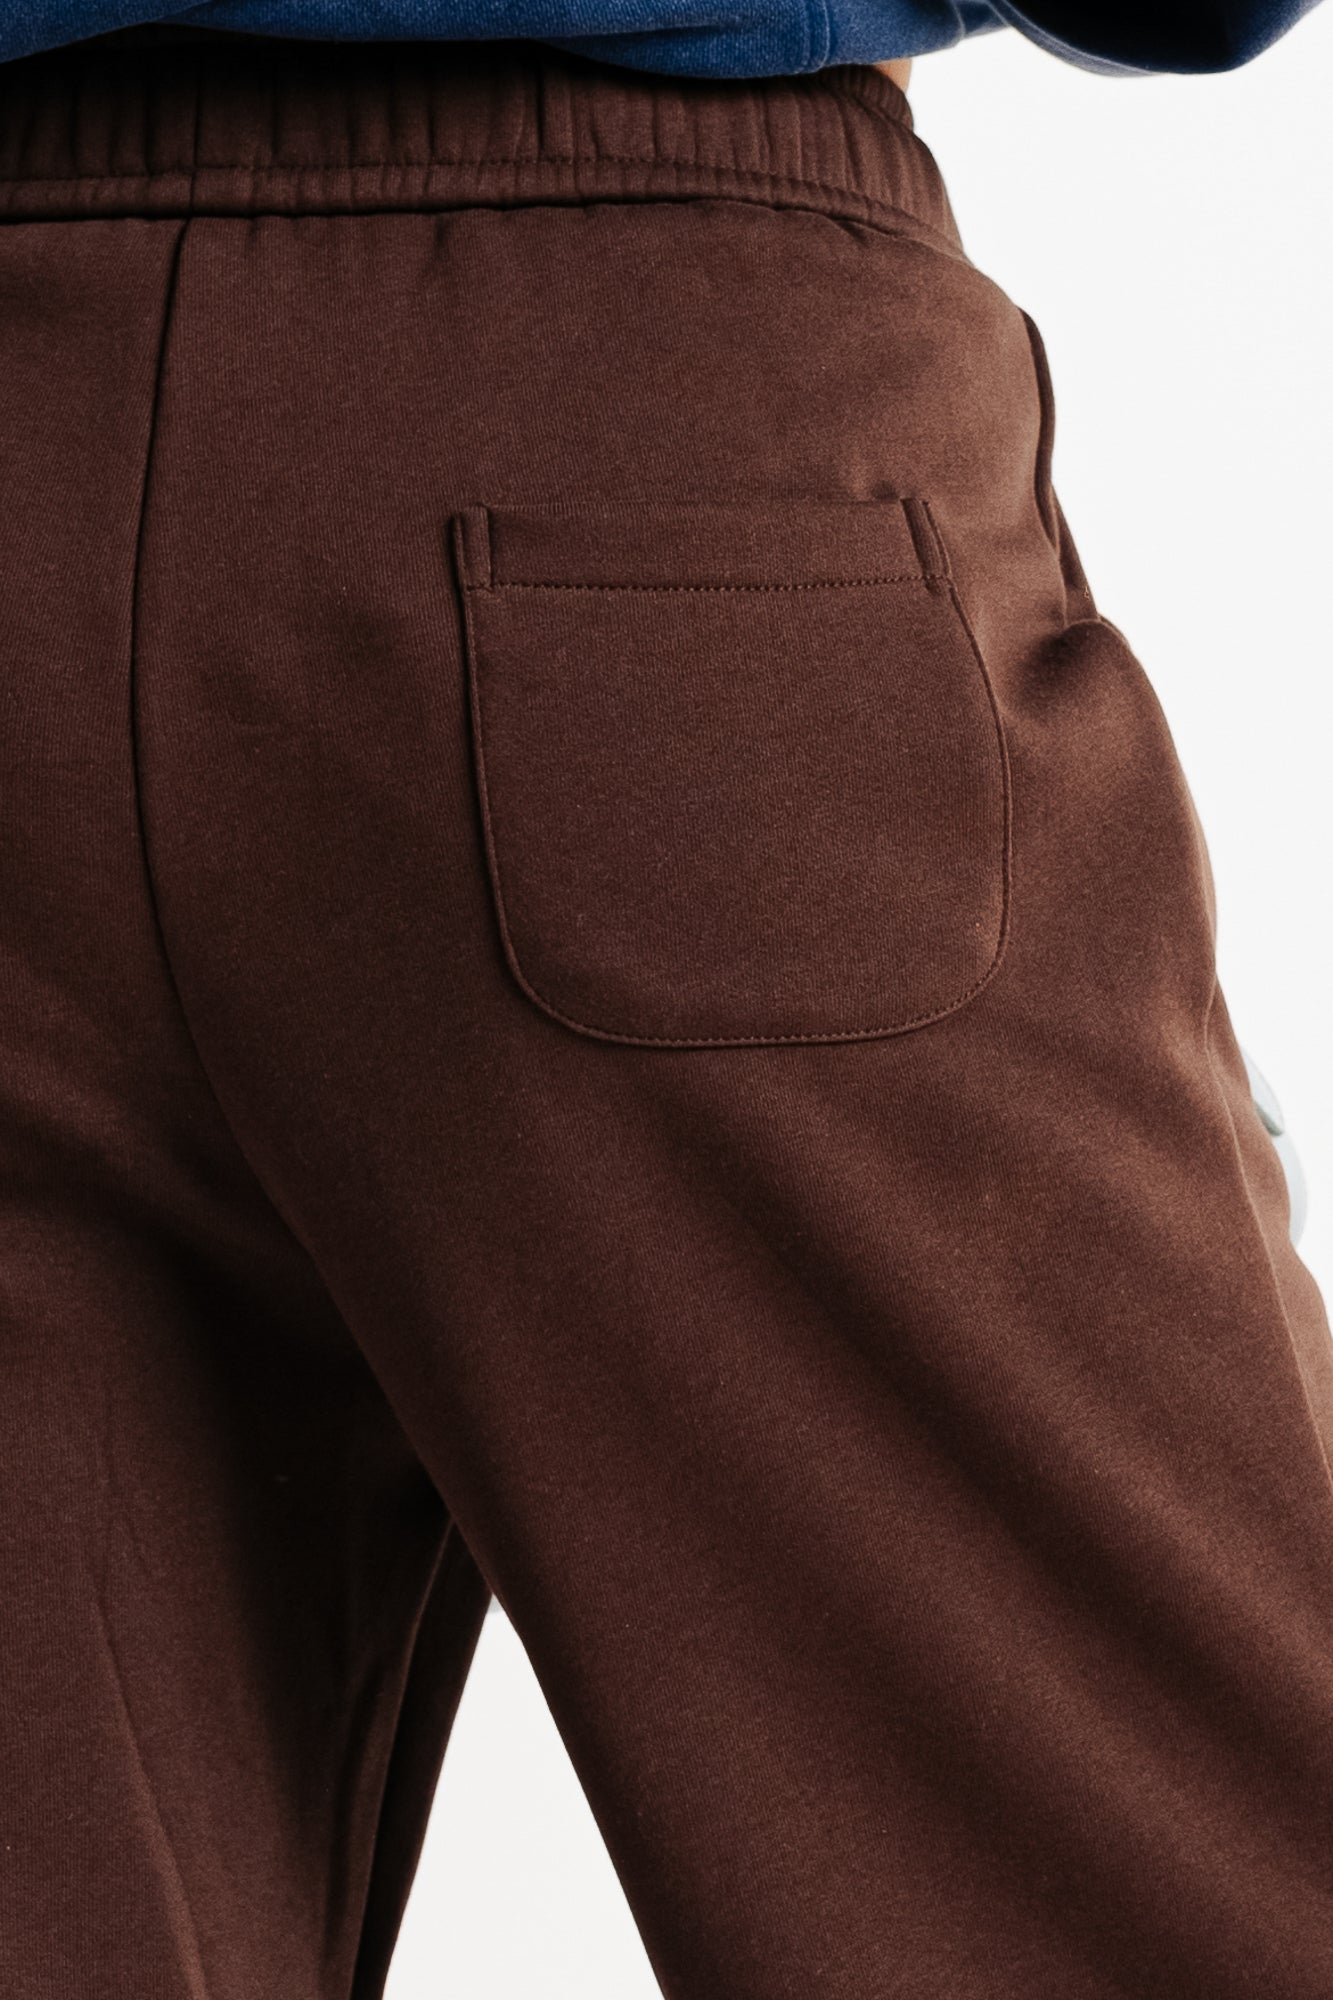 BROWN JOGGERS